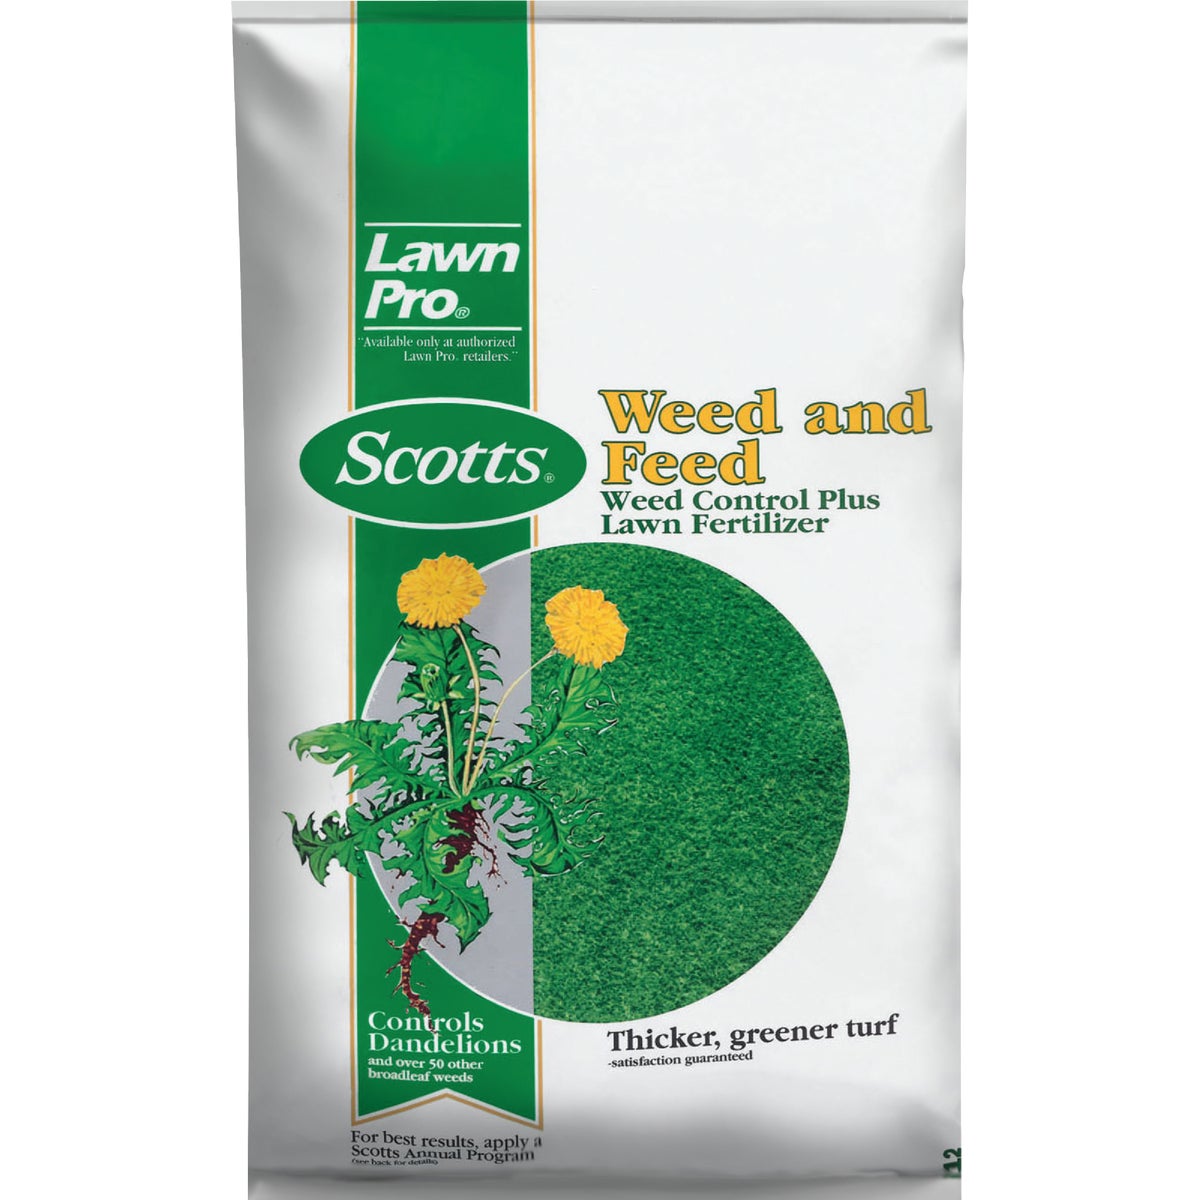 Scotts Lawn Pro Weed & Feed 44.24 Lb. 15,000 Sq. Ft. Weed Control Plus Lawn Fertilizer